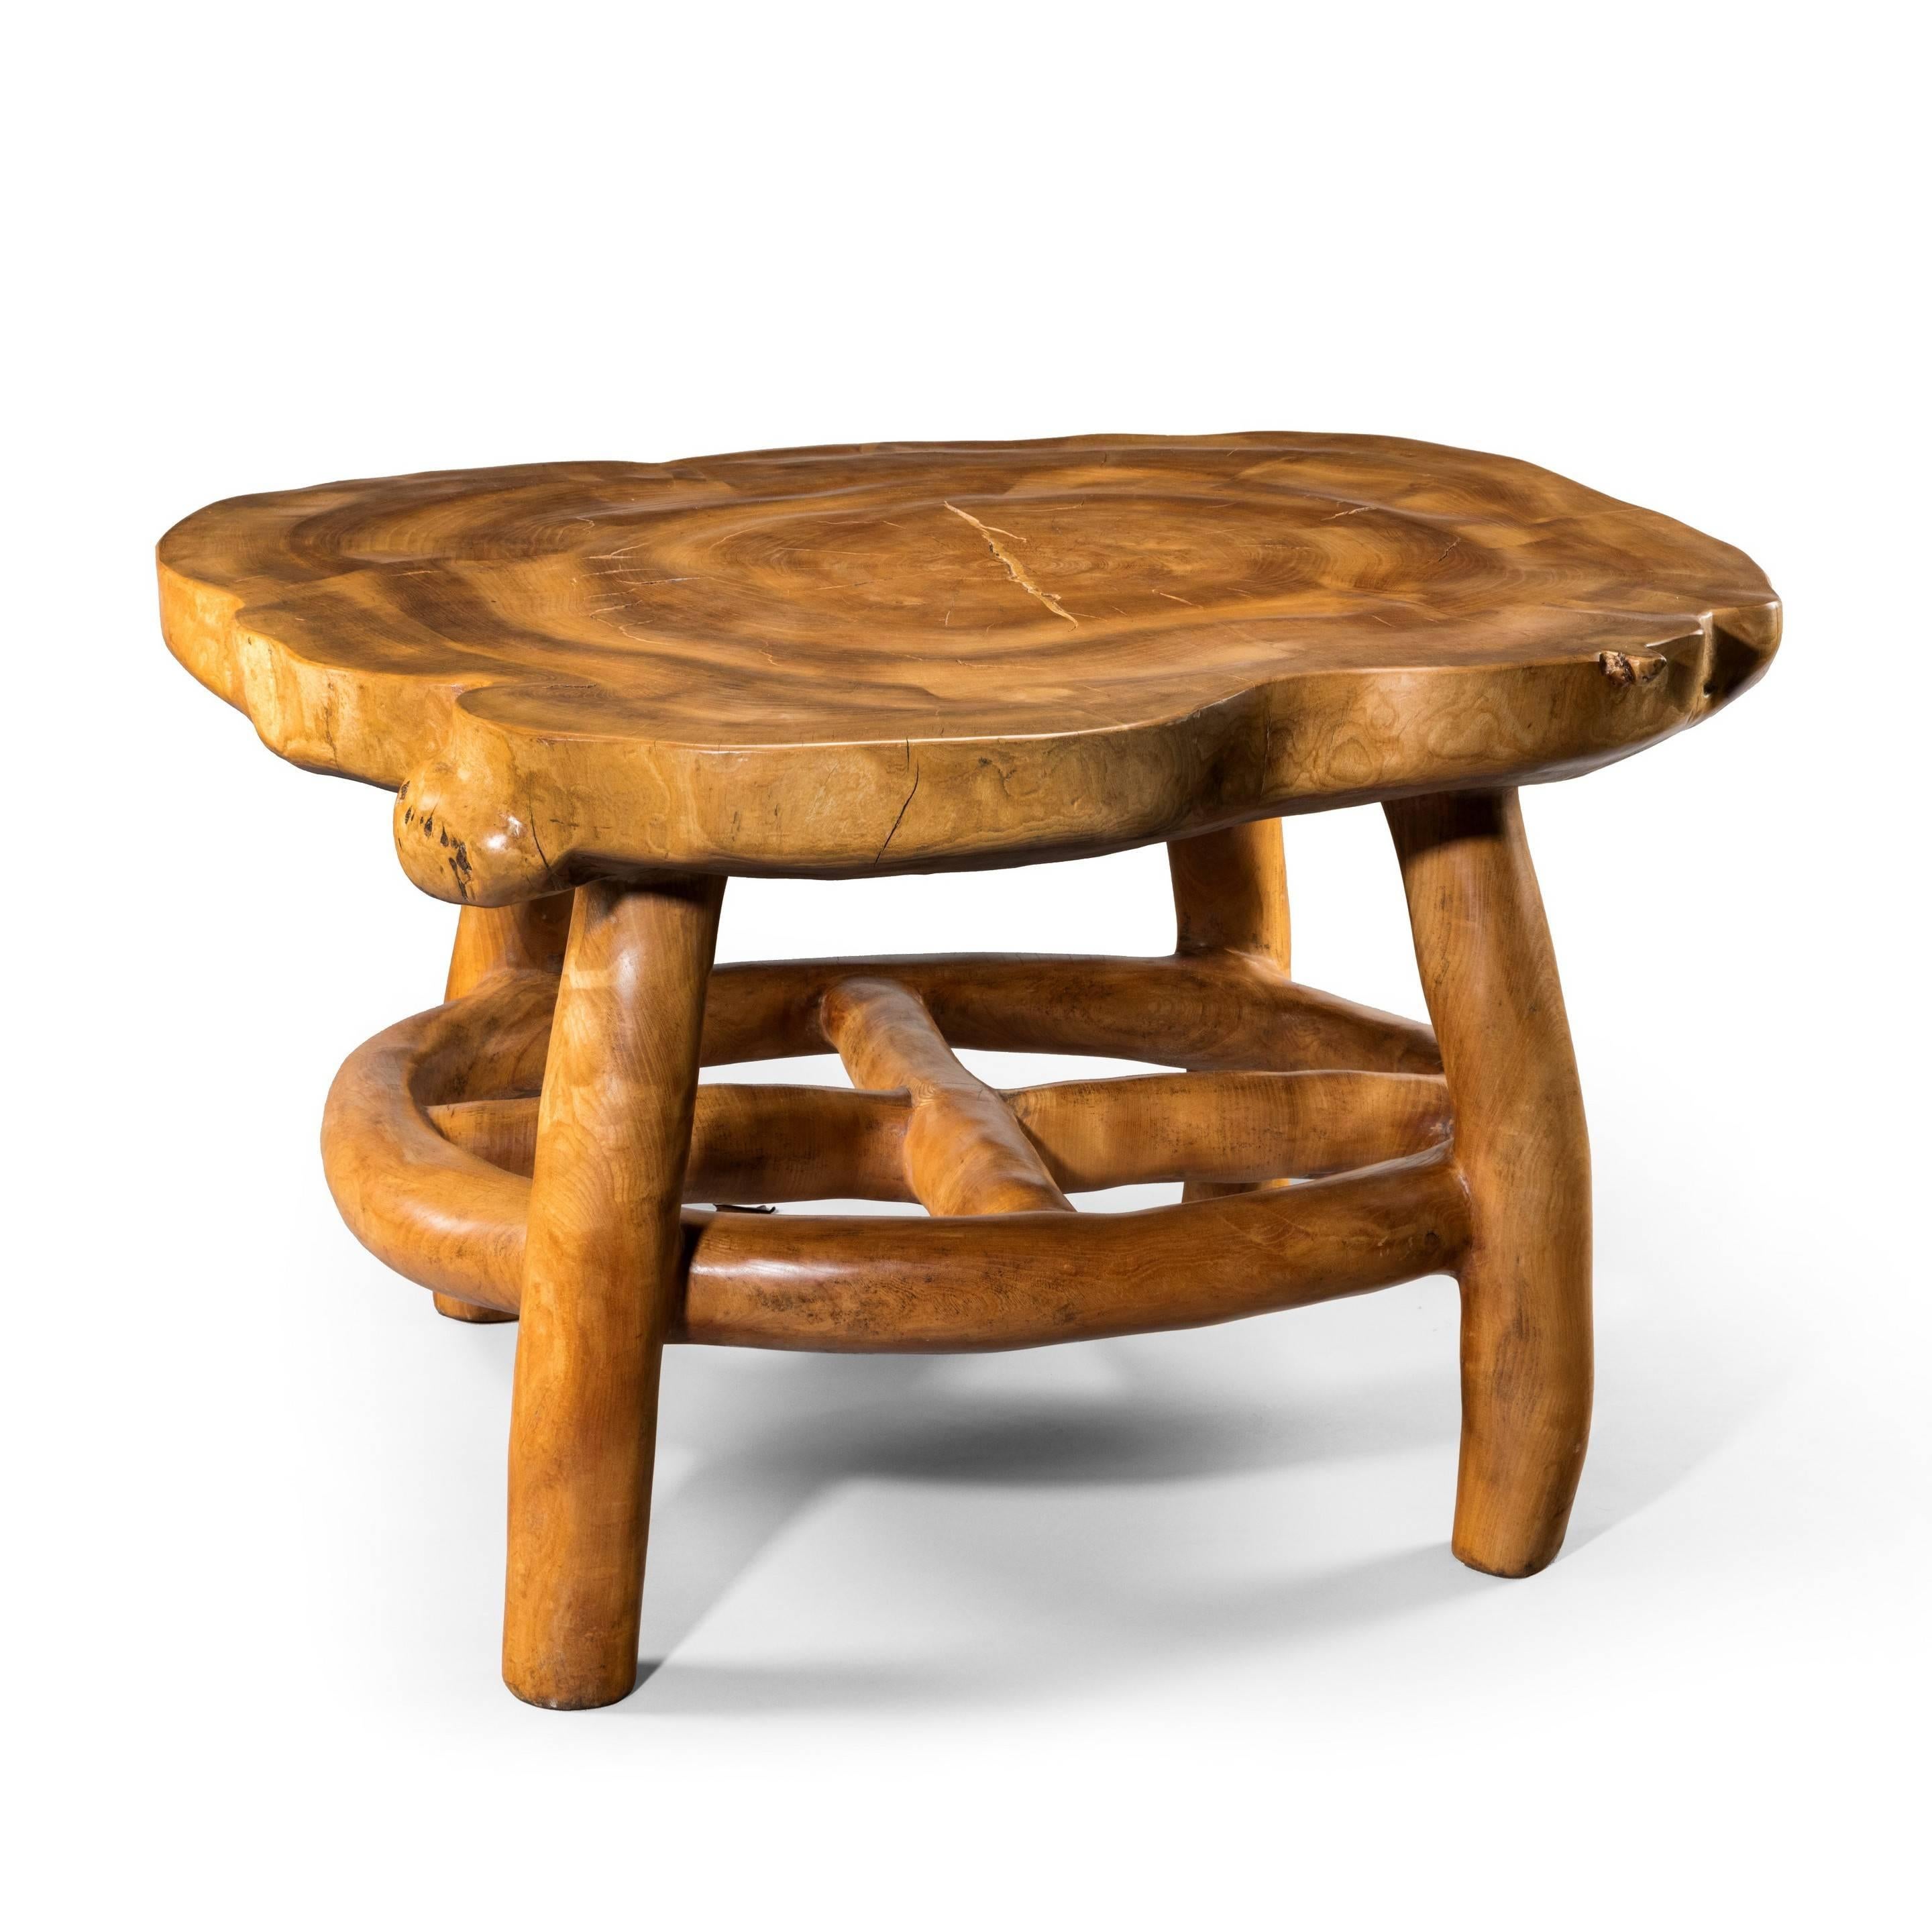 An unusual and attractive centre table by Maxie Lane, 
carved from solid elm with an irregular shaped top supported by four bowed legs and a circular cruciform stretcher.